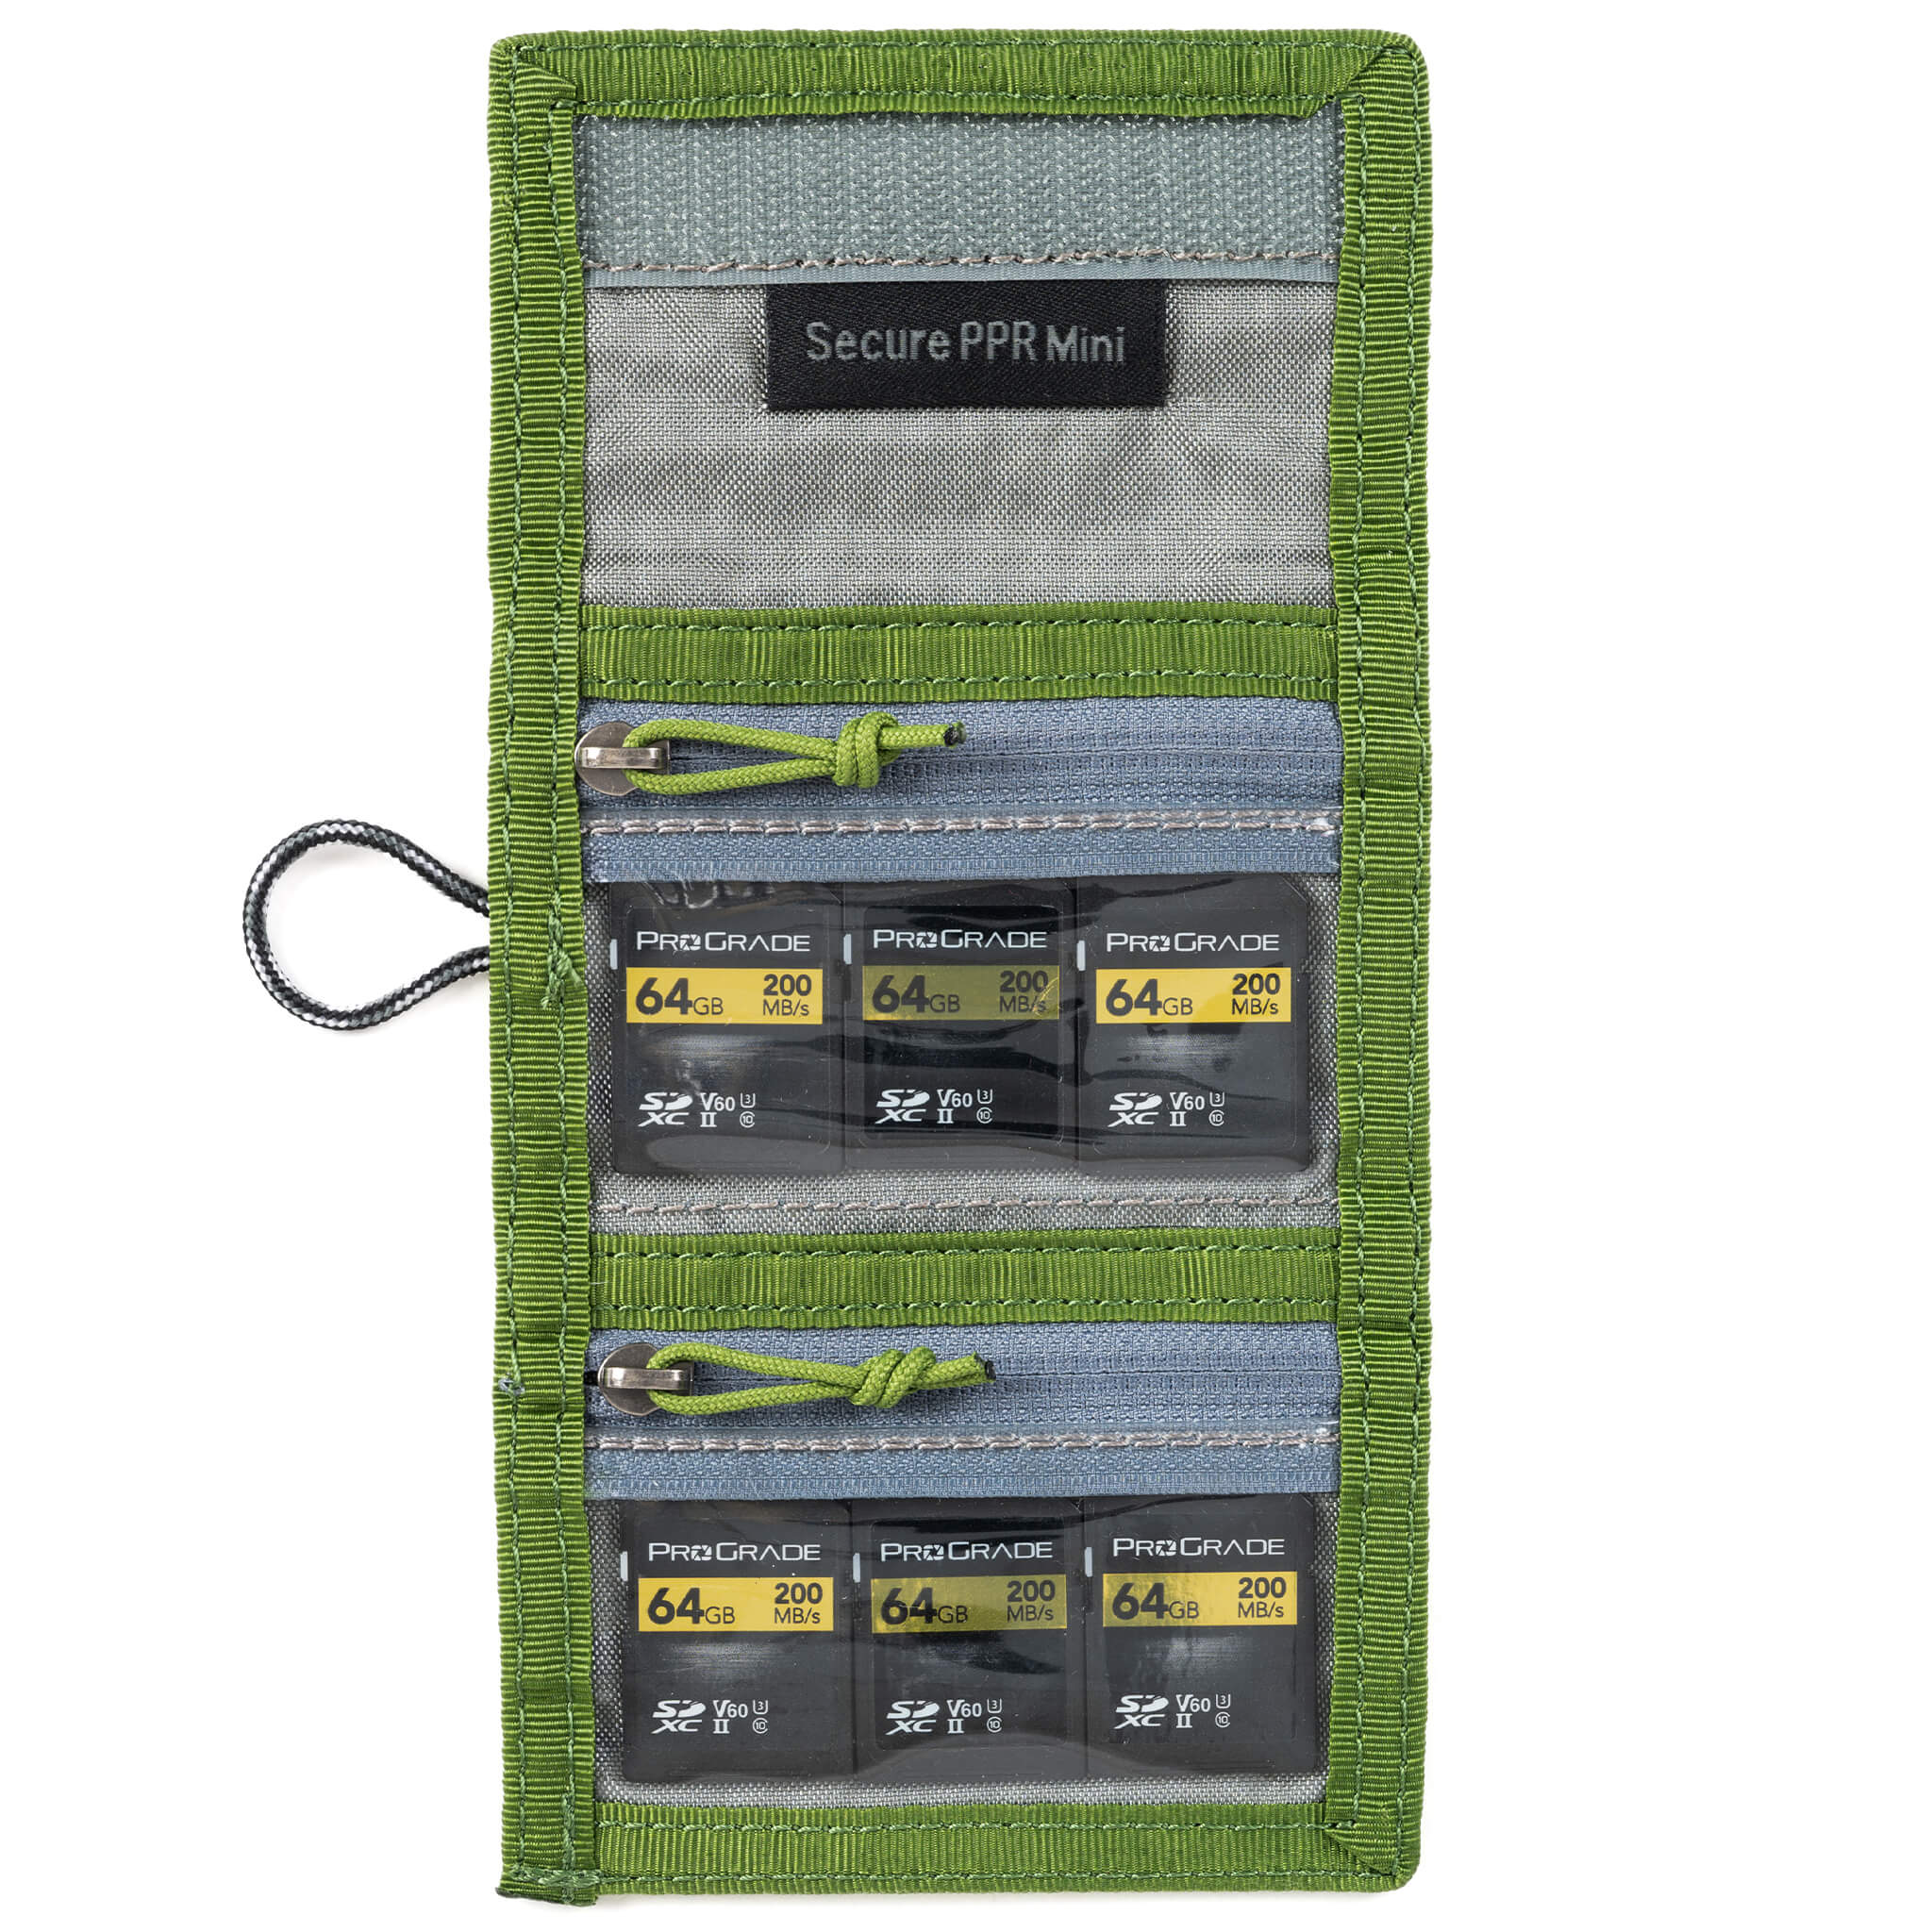 Keeping track of memory cards is of the utmost importance to photographers. Convenient folding wallet for 4 CF or 4 XQD or 6 SD or multiple micro SD memory cards.